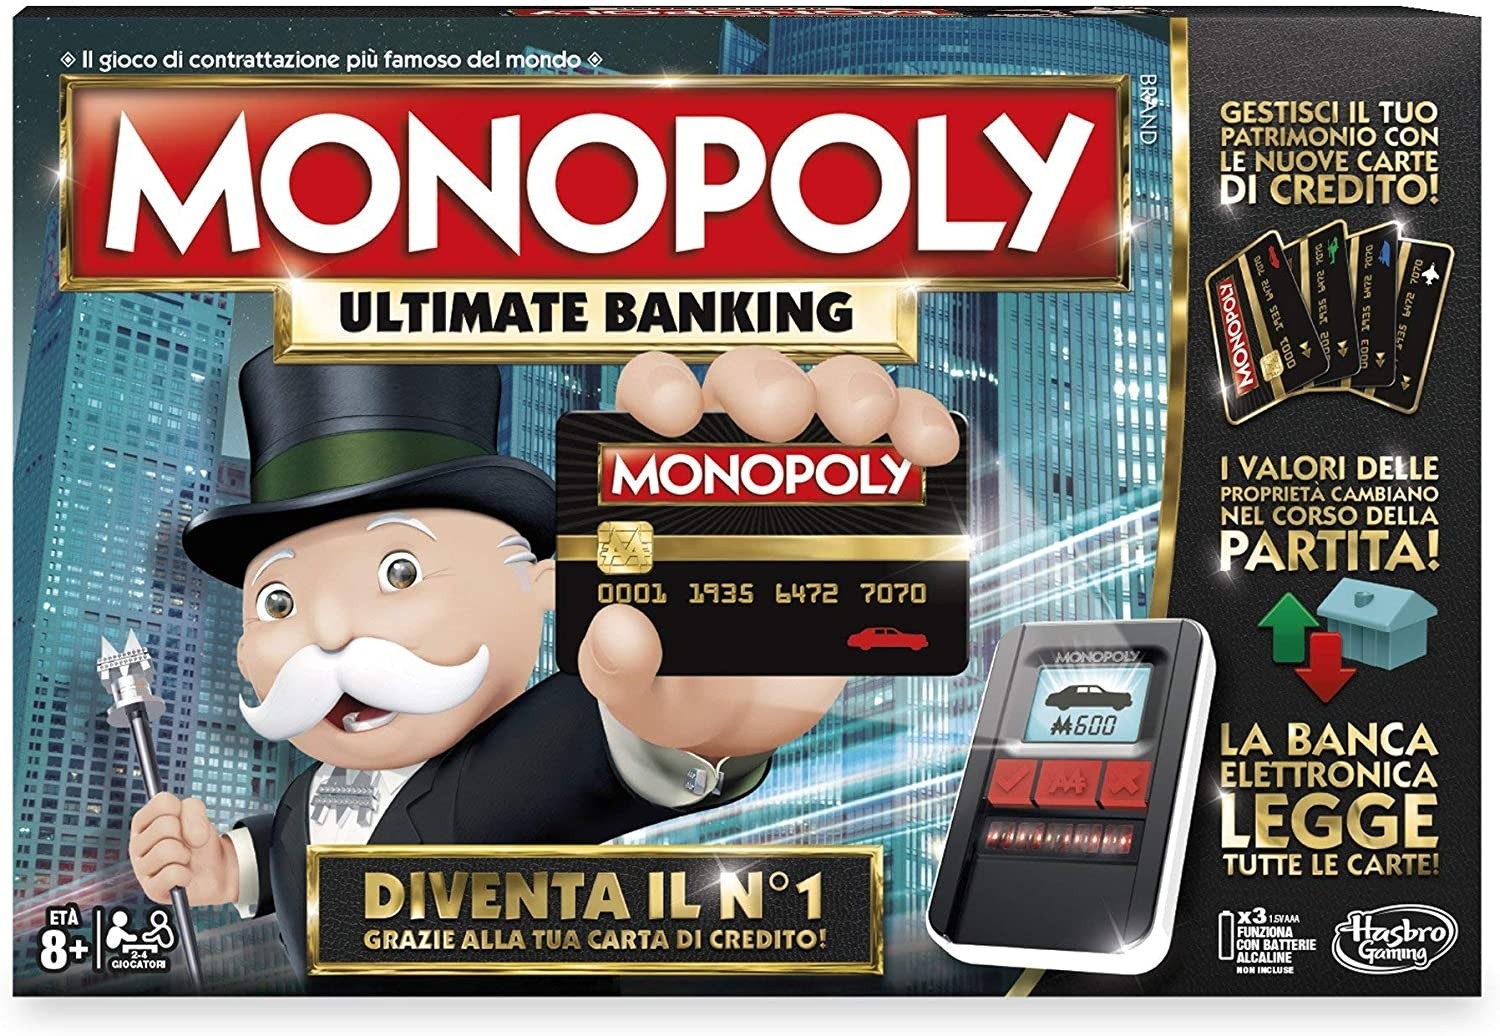 MONOPOLY SUPER BANKING